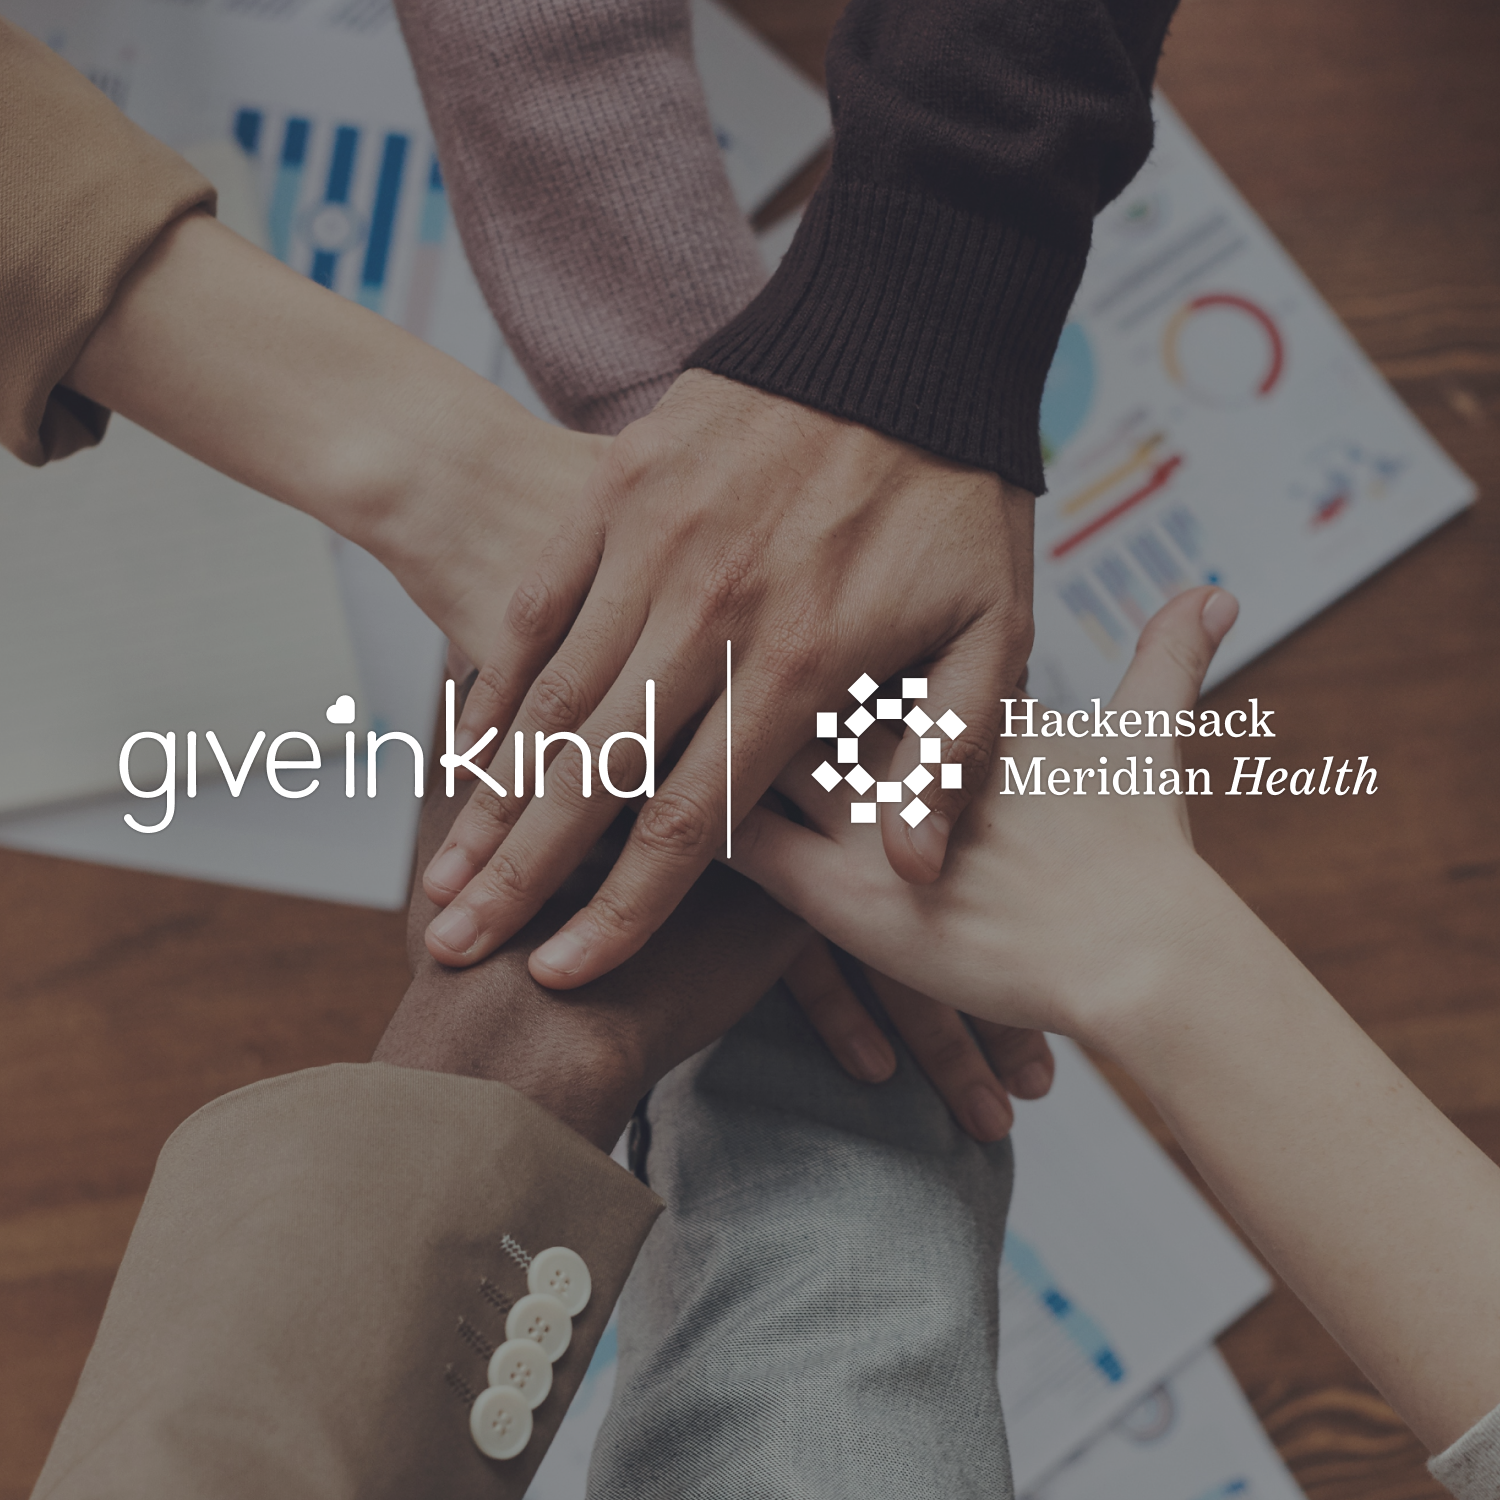 Give InKind Partners with Hackensack Meridian Health to Improve Patient Experience